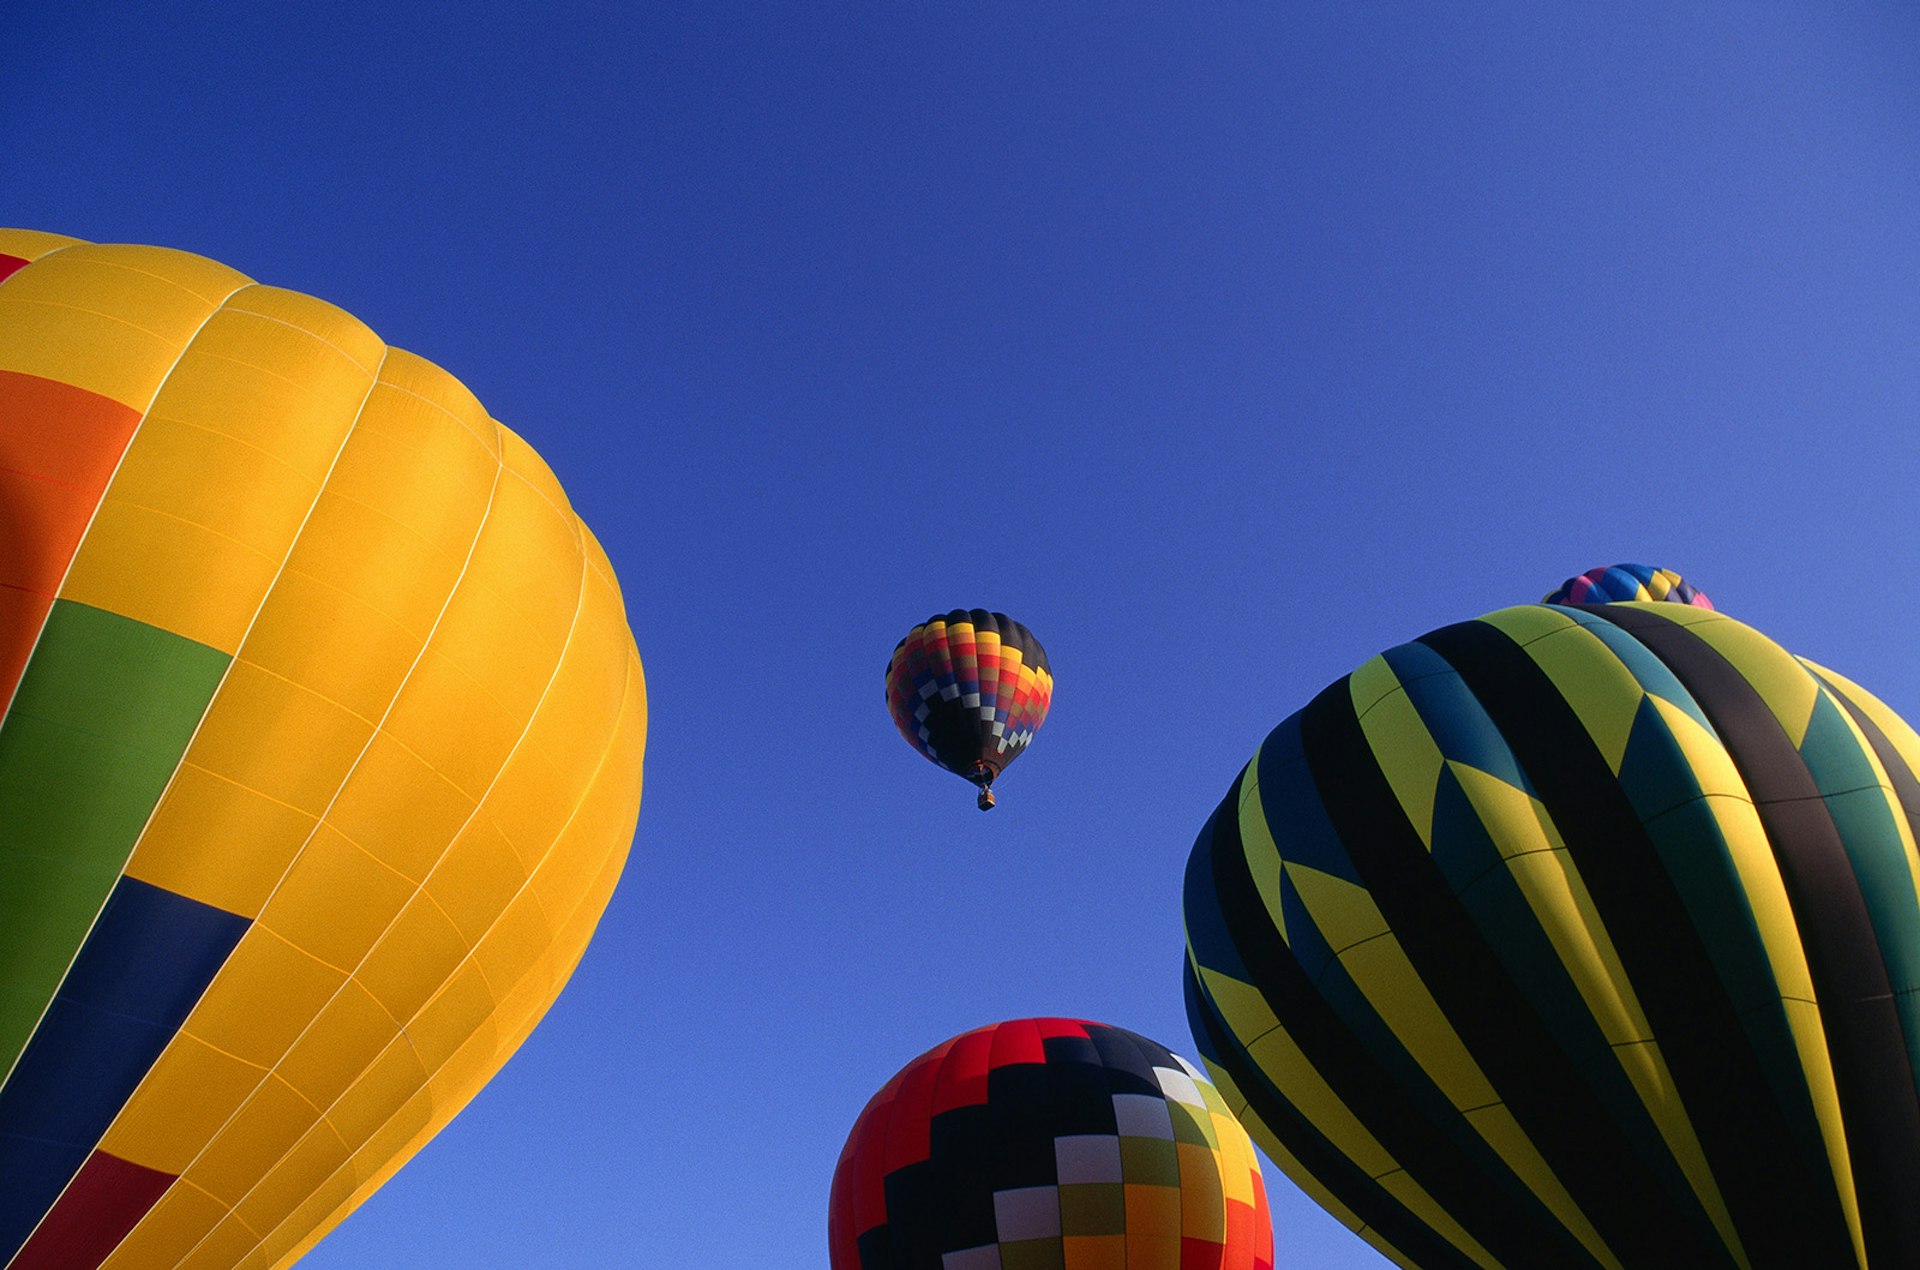 close-up of three hot air balloons with a fourth in the distance, in a clear blue sky